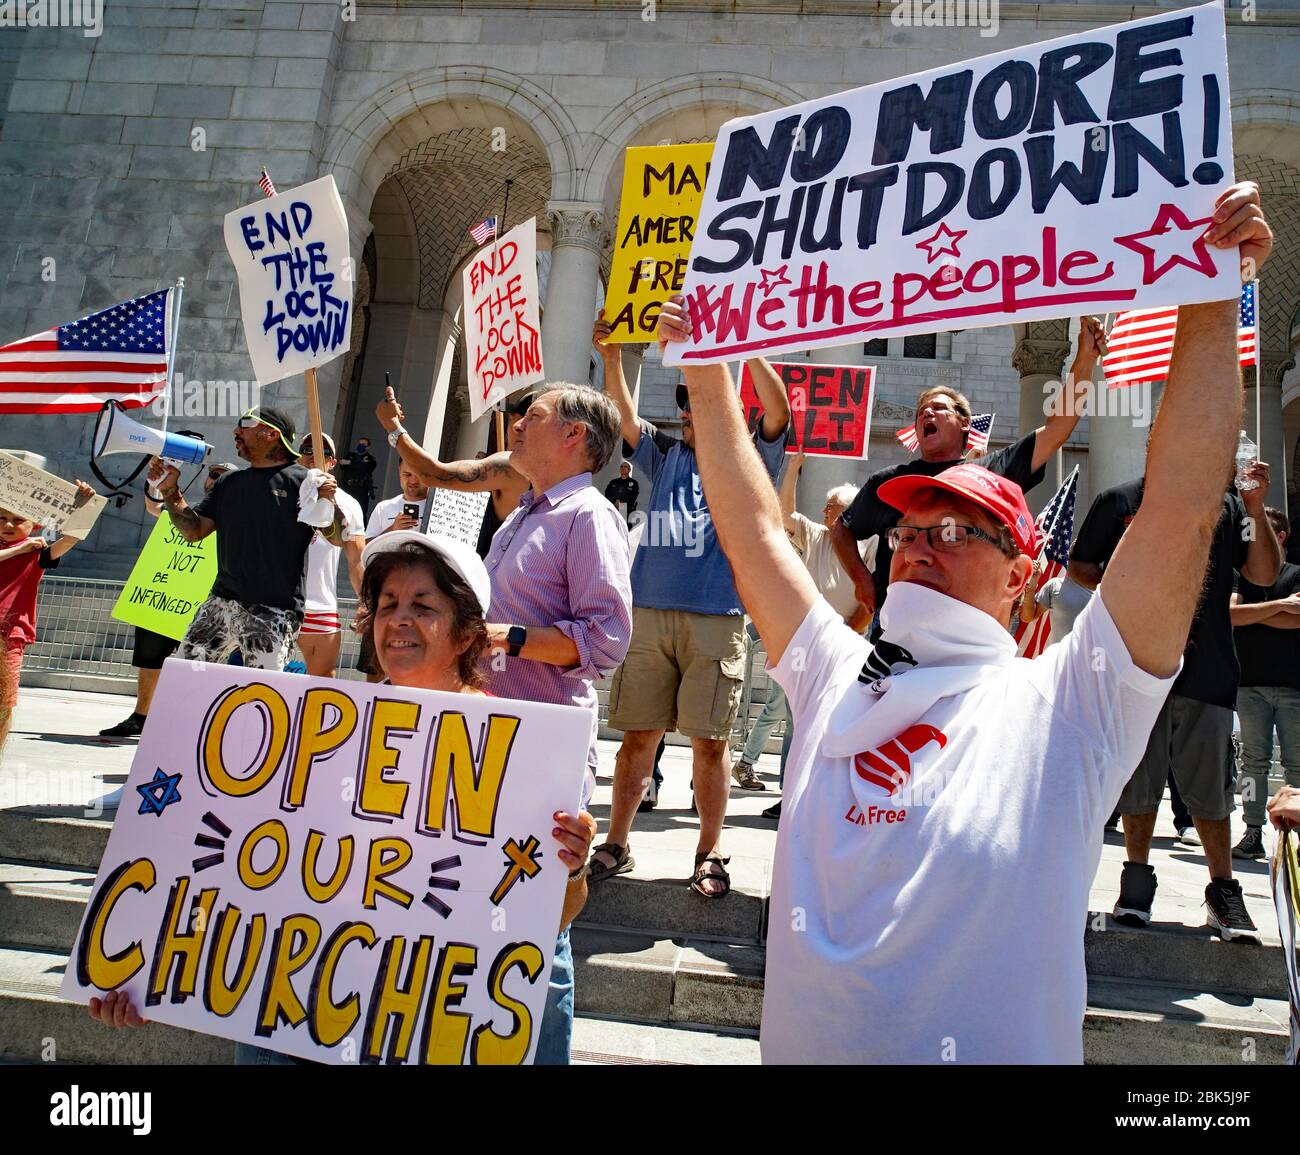 FULLYOPENCA May 1, 2020 Los Angeles, Ca. Hundreds gathers in front of Los Angeles City Hall protesting Stay At Home, displaying Signs no more shutdown, open our churches Stock Photo